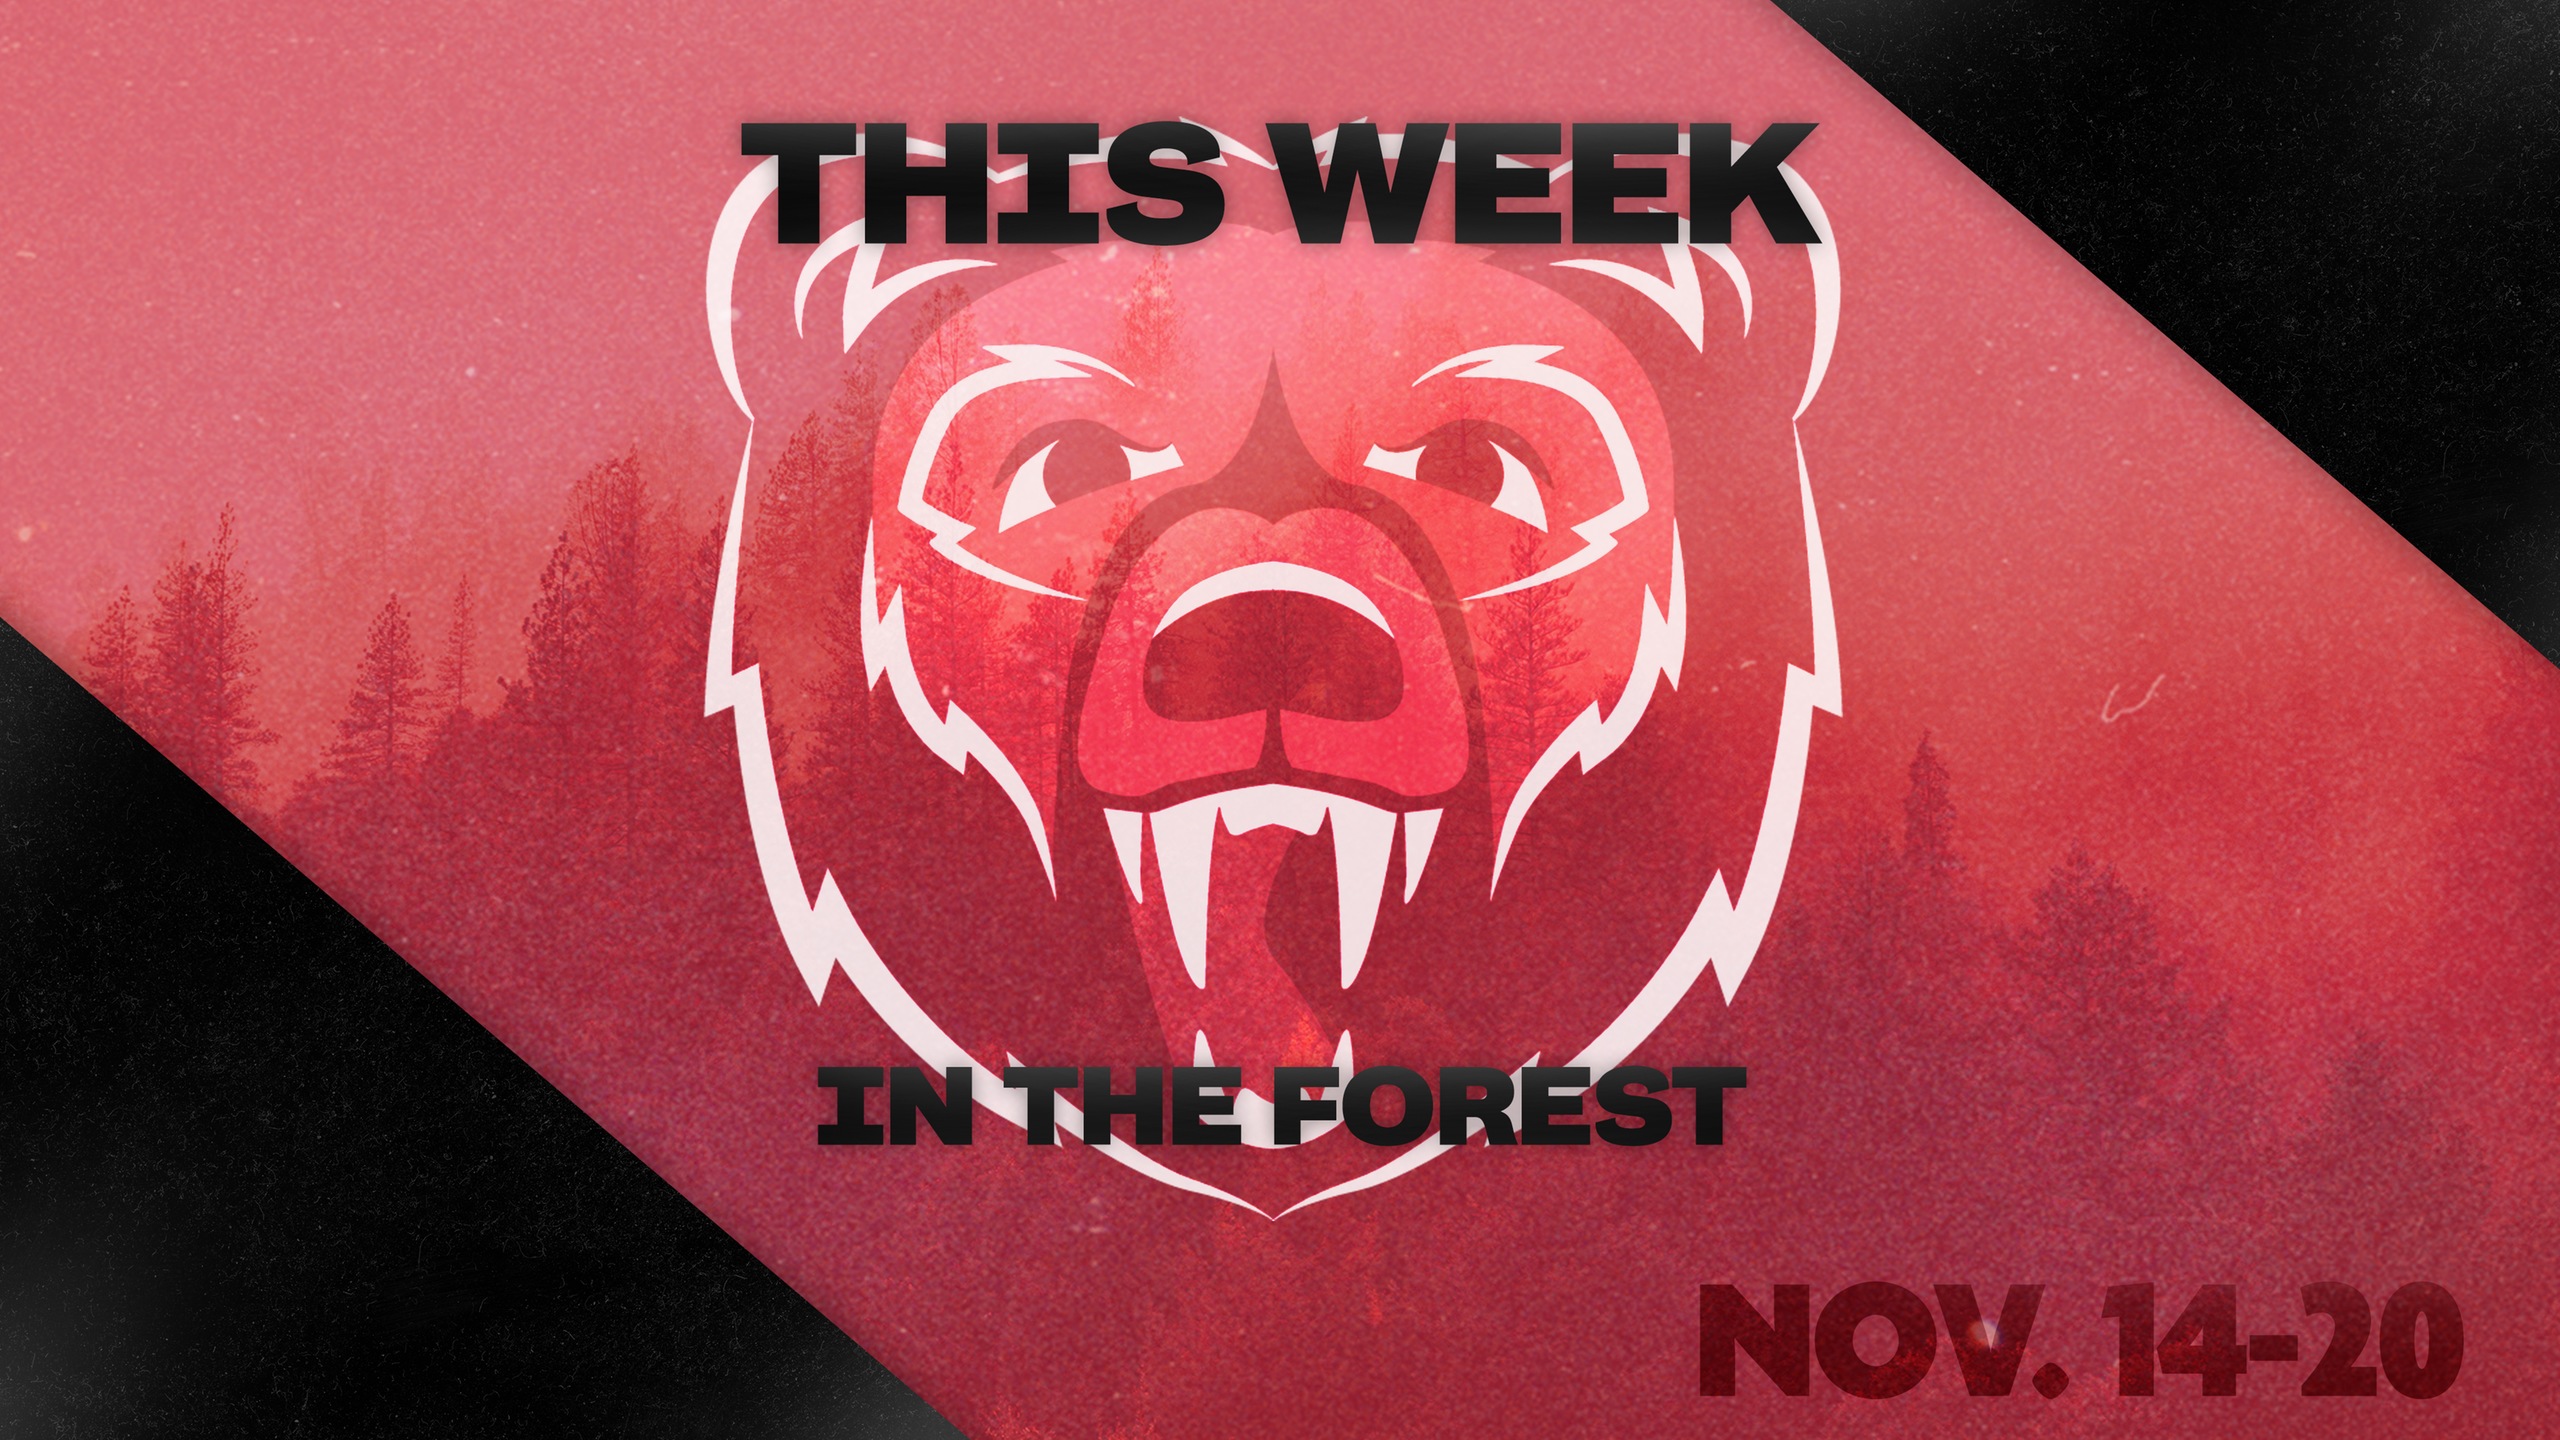 This Week in The Forest: Nov. 14-20